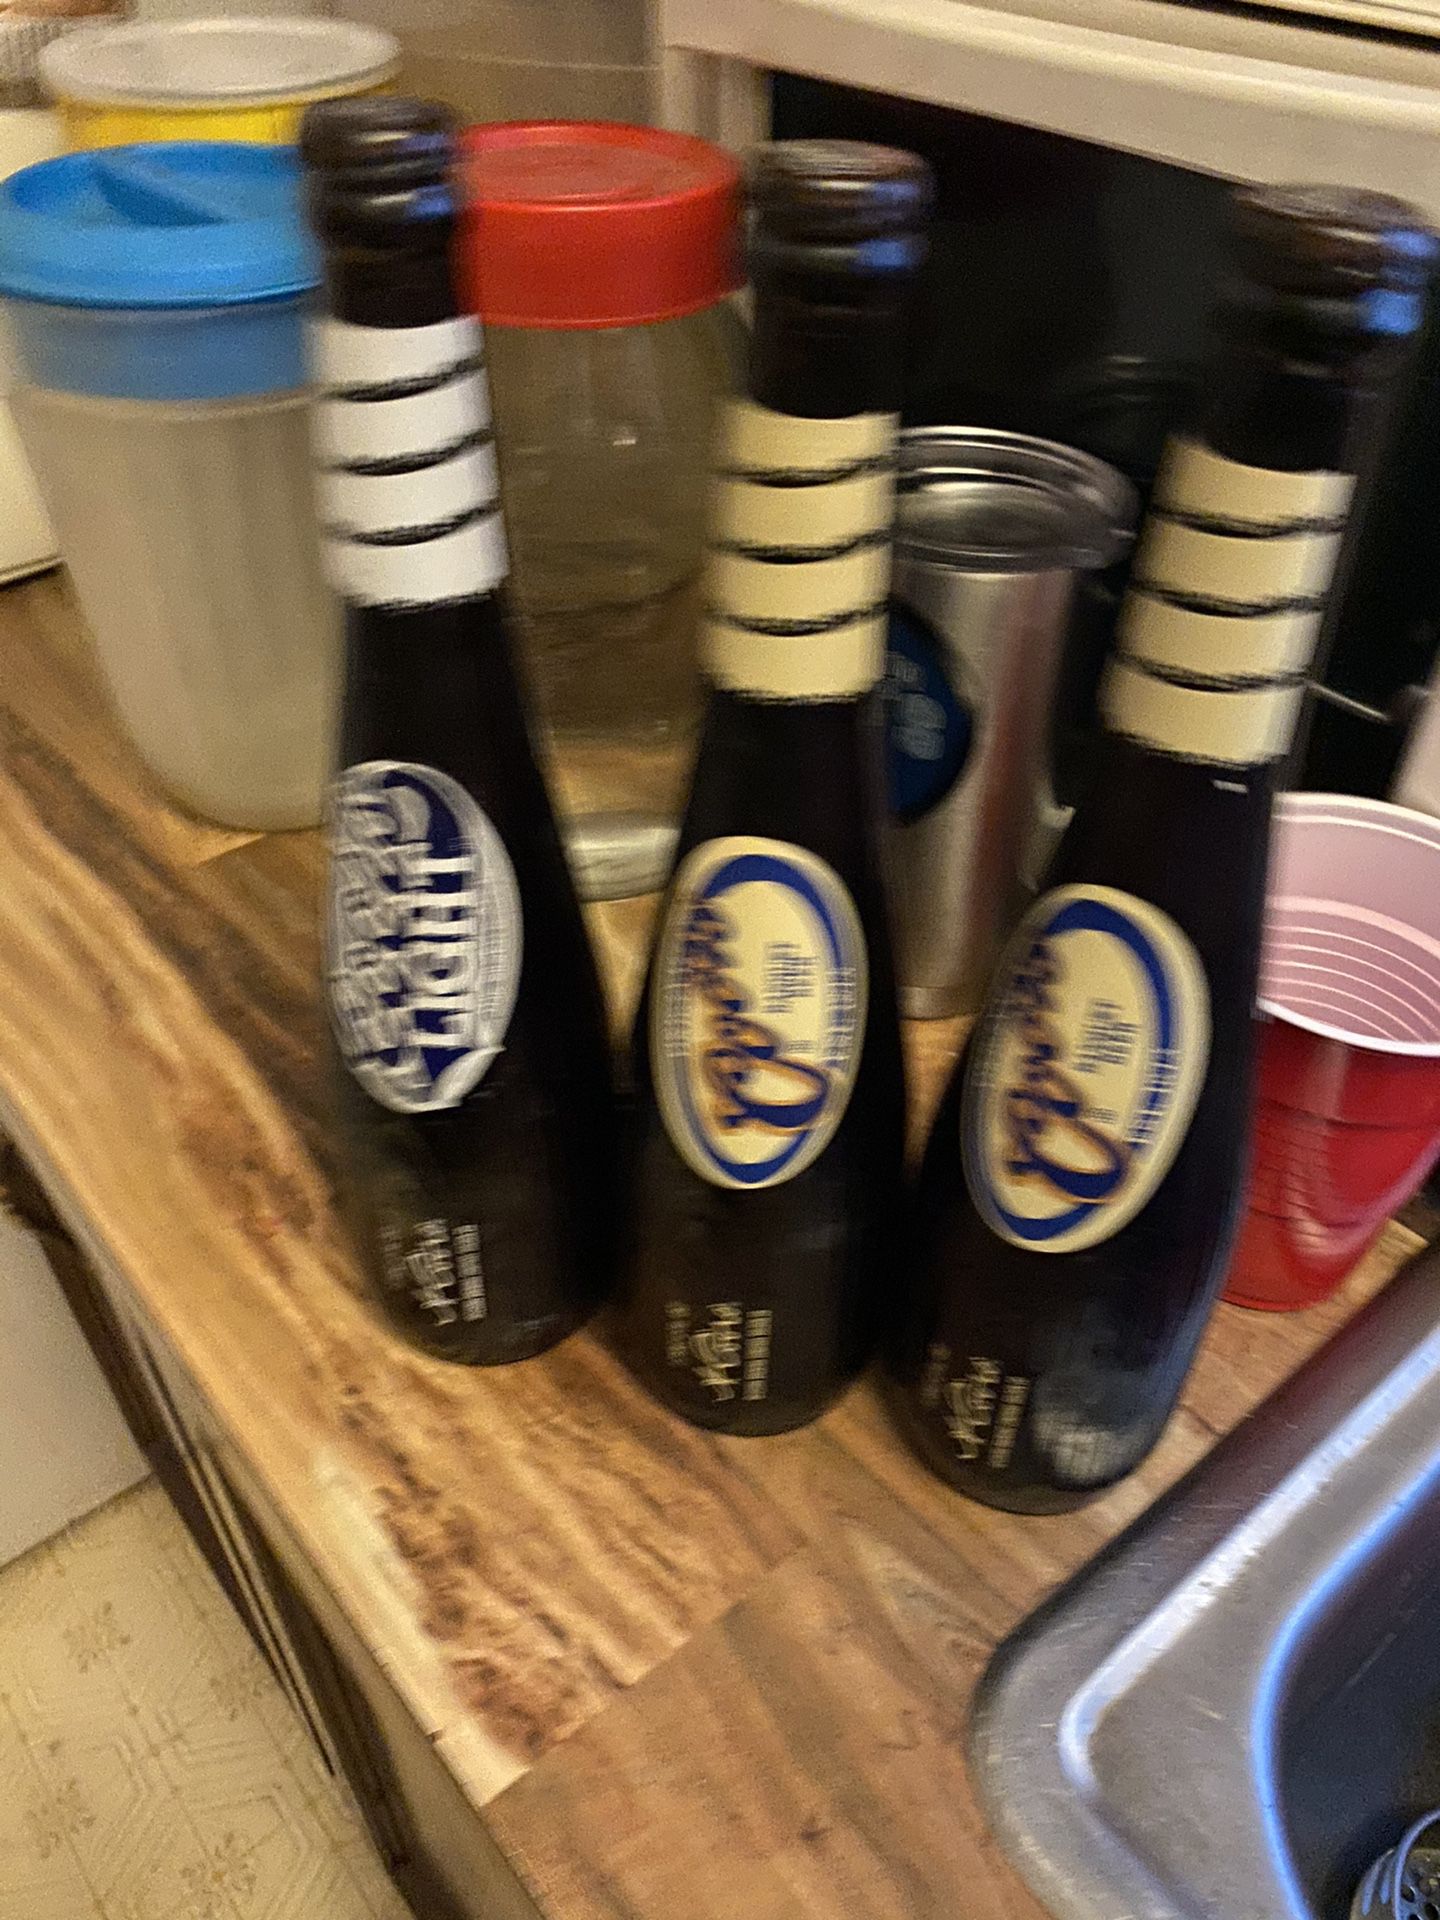 Coors limited Editon bottles